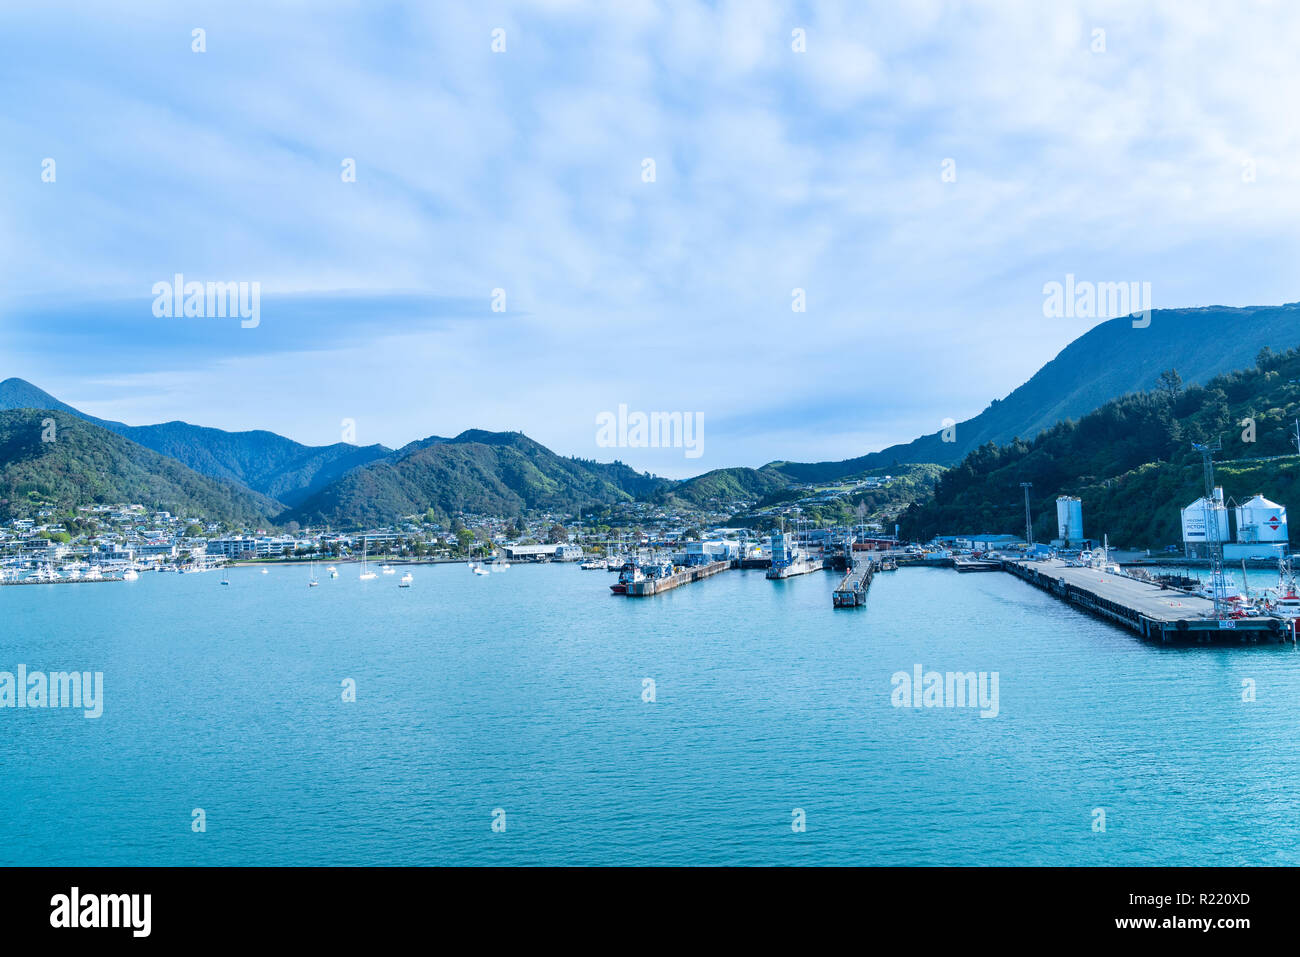 PICTON NEW ZEALAND - OCTOBER 2 2018; Arriving at tourist township Picton in Queen Charlote Sound in Marlborough Sounds of South Island New Zealand. Stock Photo